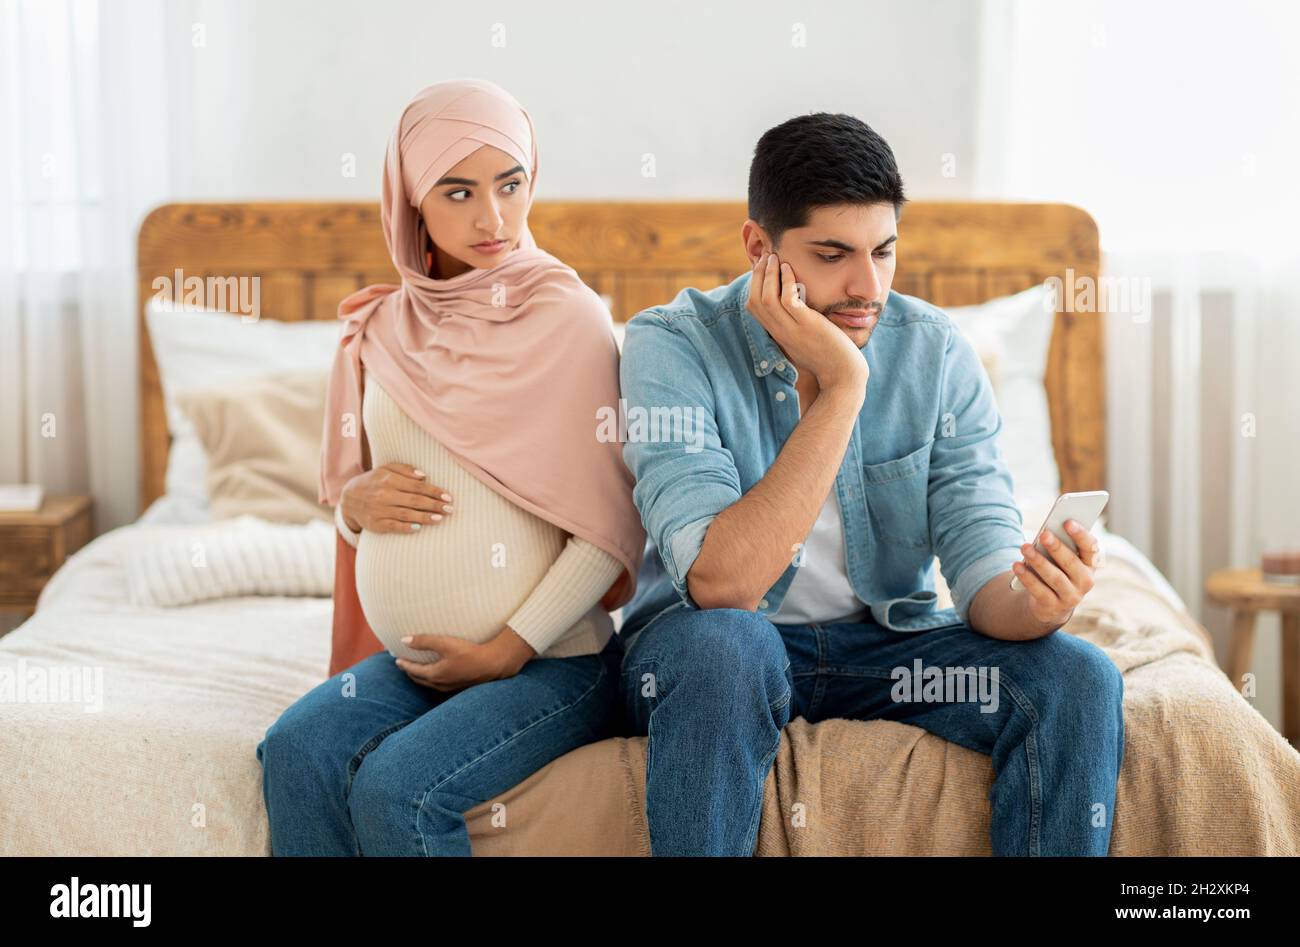 Young pregnant muslim woman offended to her husband busy with smartphone, arab lady in hijab feeling lonely Stock Photo